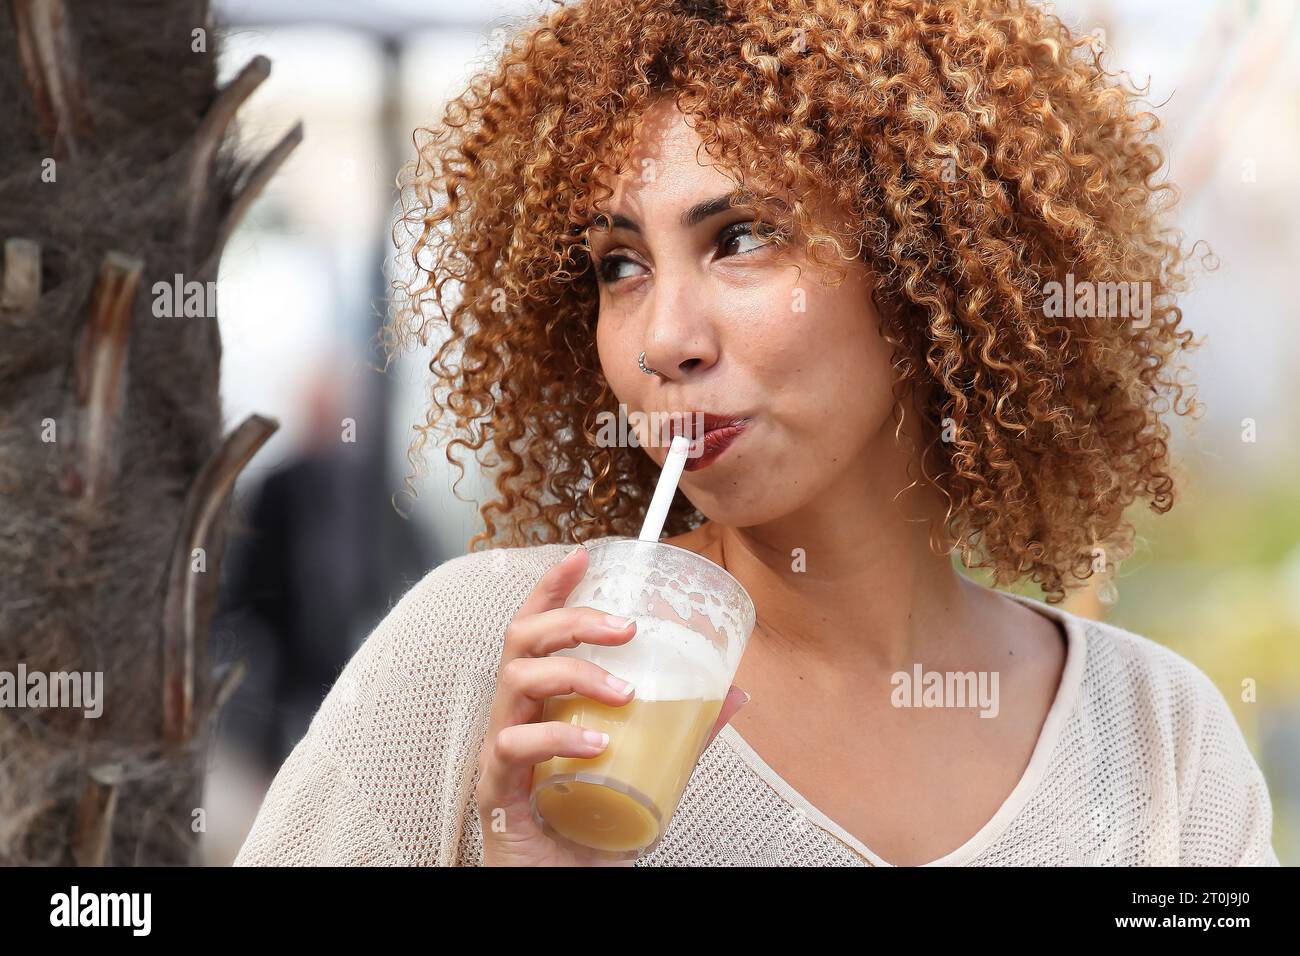 Portrait of a curly hair woman drinking outdoor in an exotic country Stock Photo